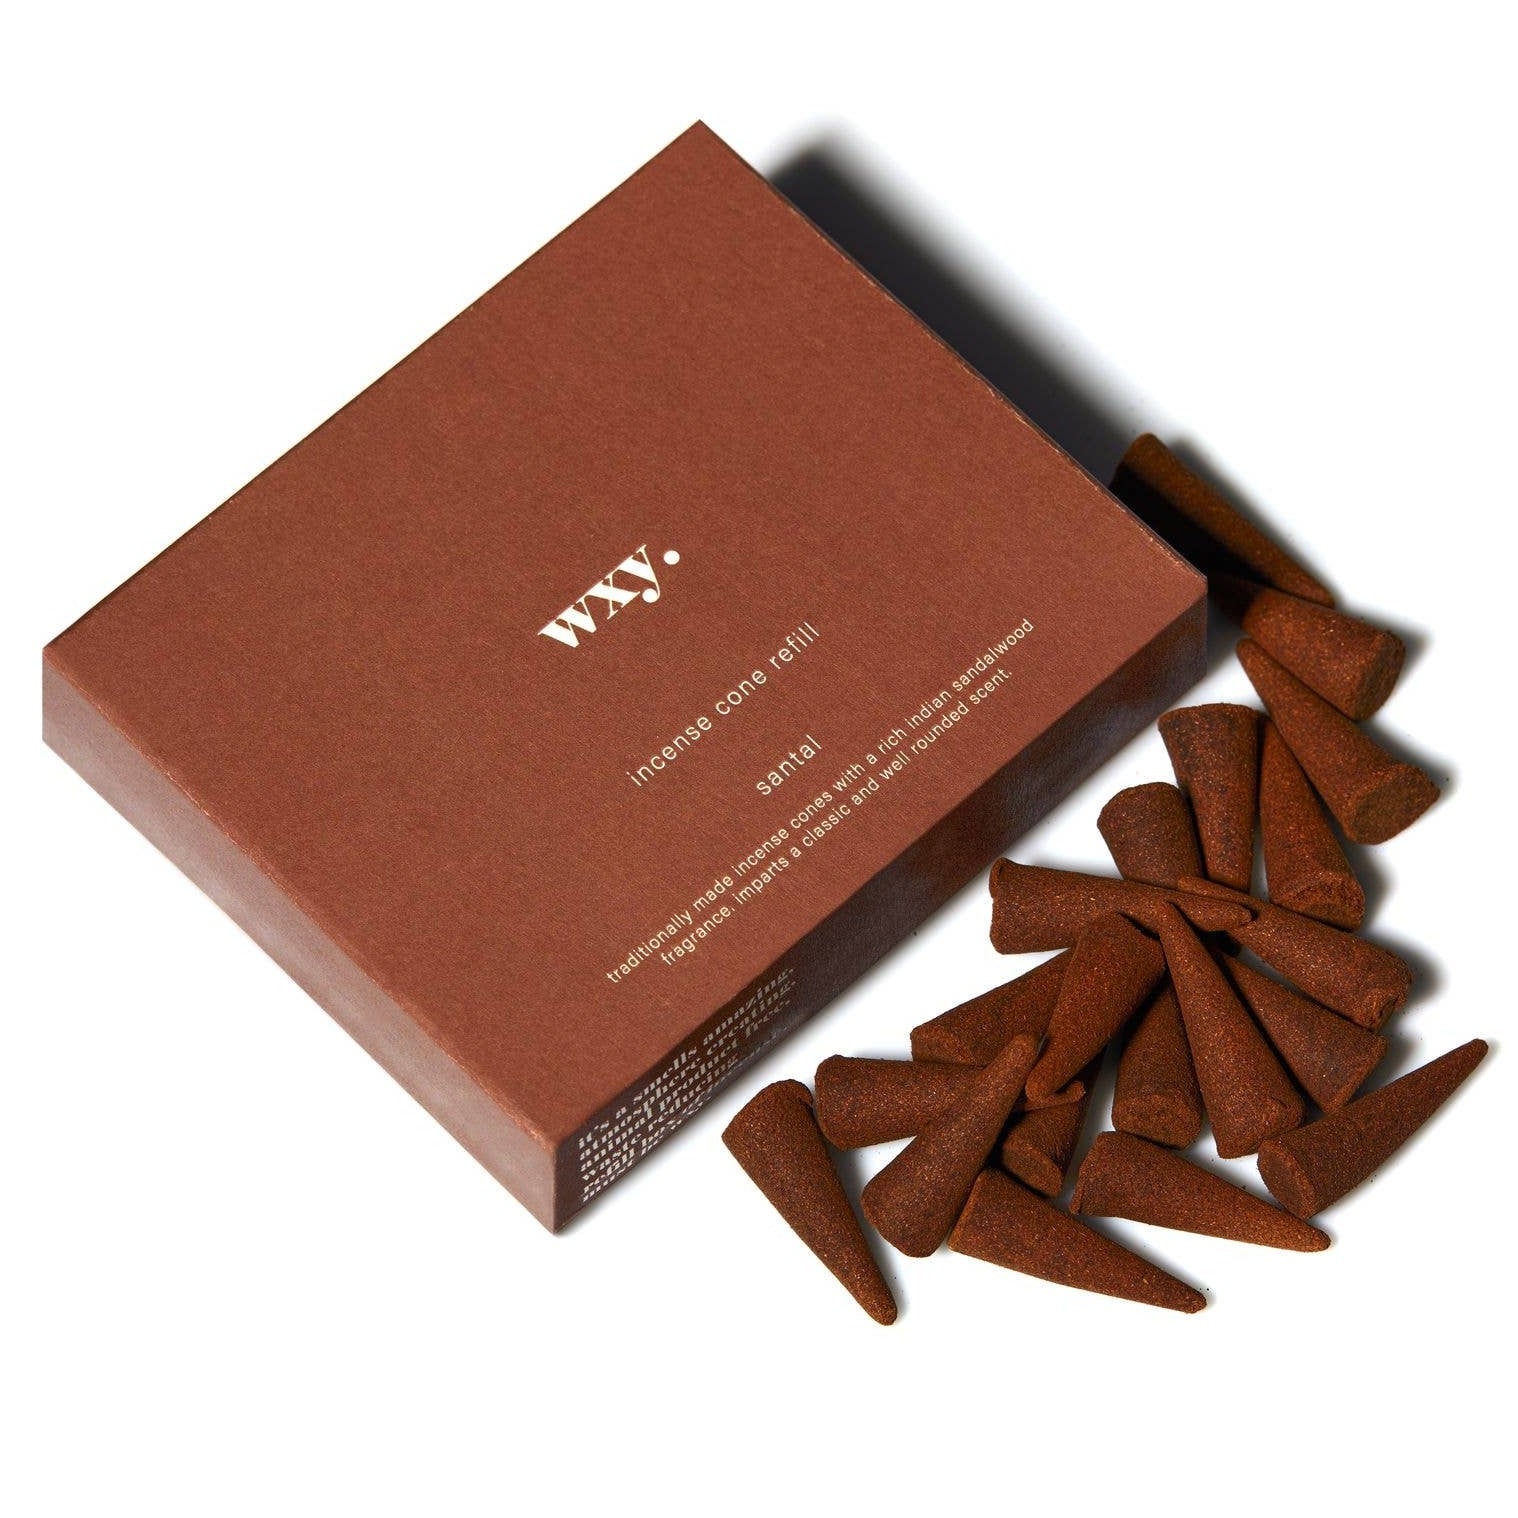 Incense Cone Refill Santal by wxy.